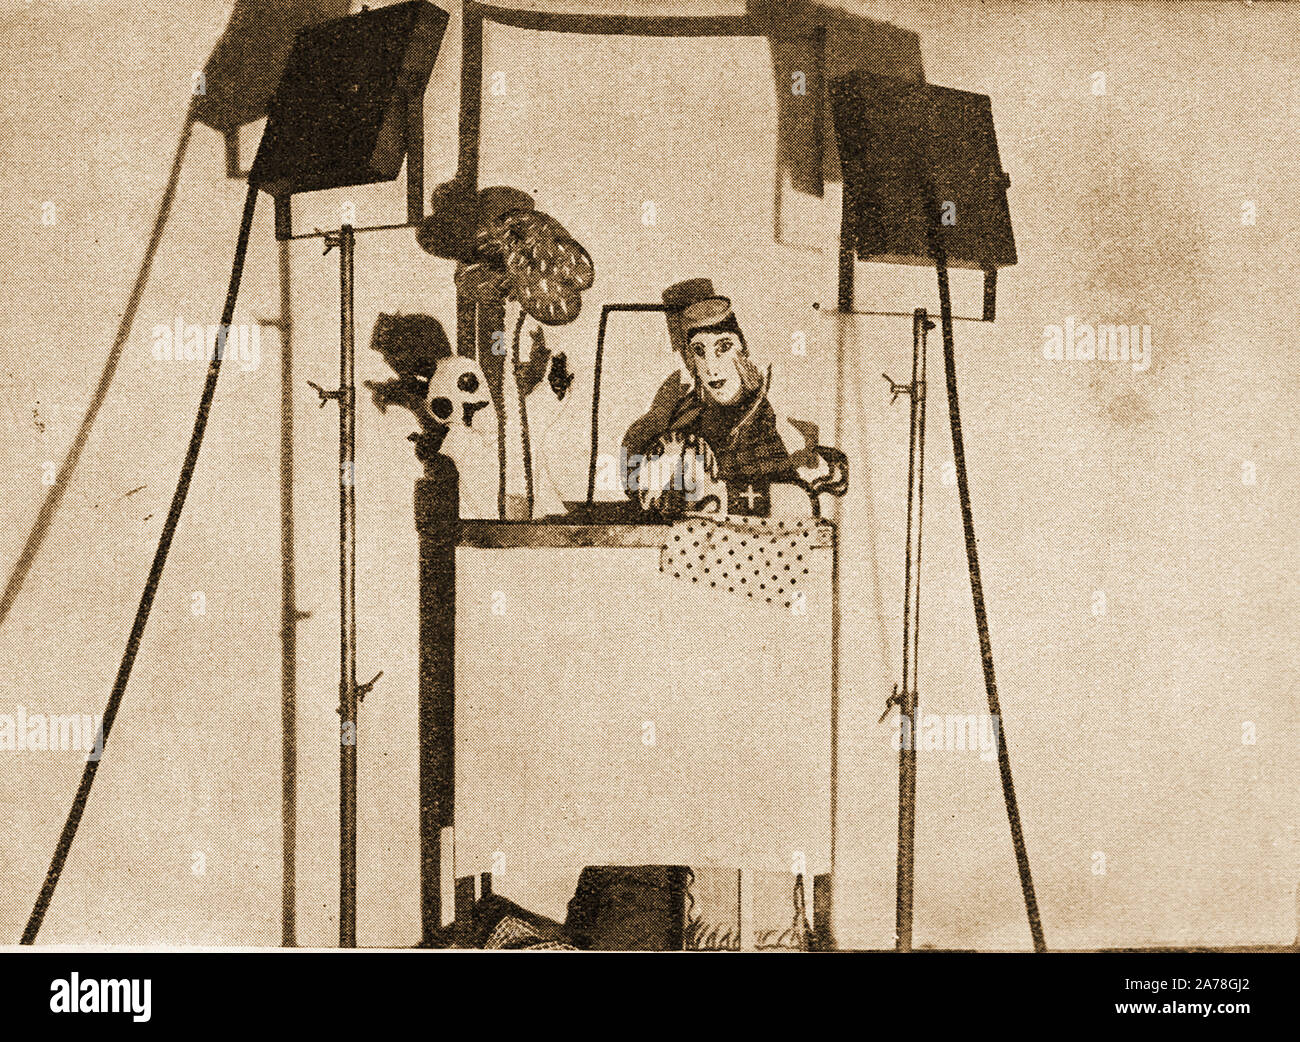 C 1930's -EARLY DAYS OF British Television - A Marionette or puppet  (Pantopuck Puppet) show Stock Photo